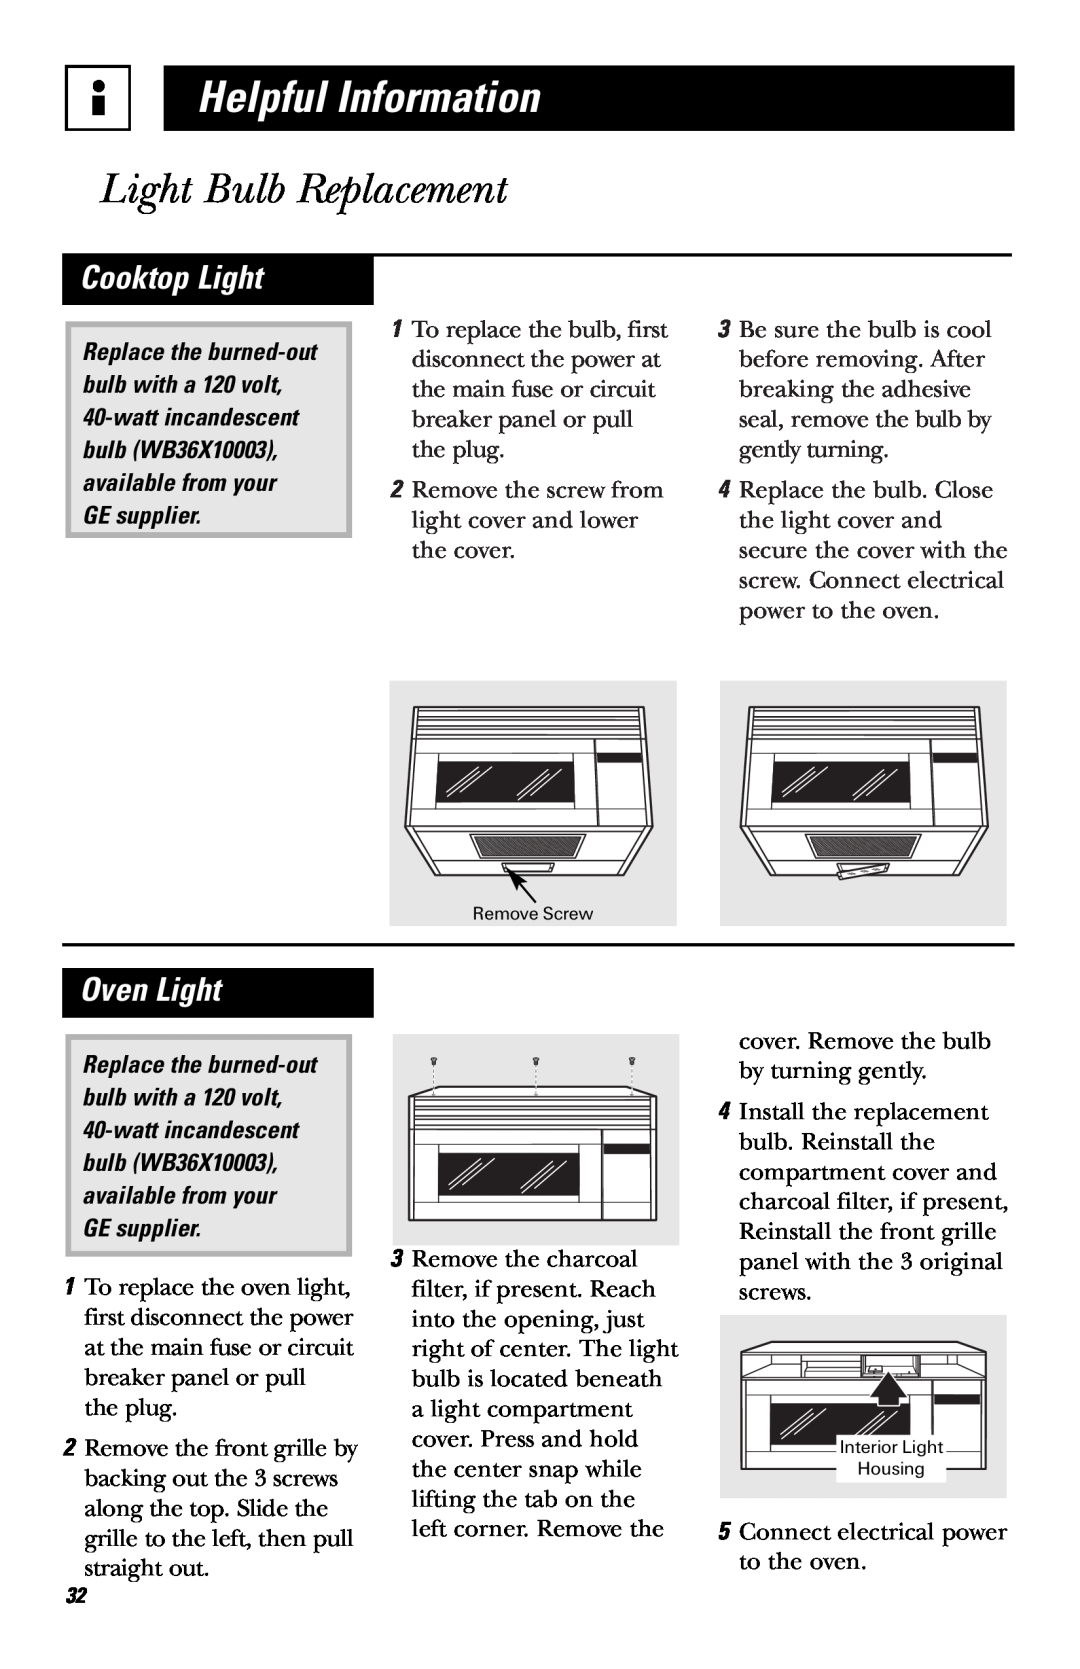 Hotpoint RVM1635 owner manual Light Bulb Replacement, Cooktop Light, Oven Light, Helpful Information 